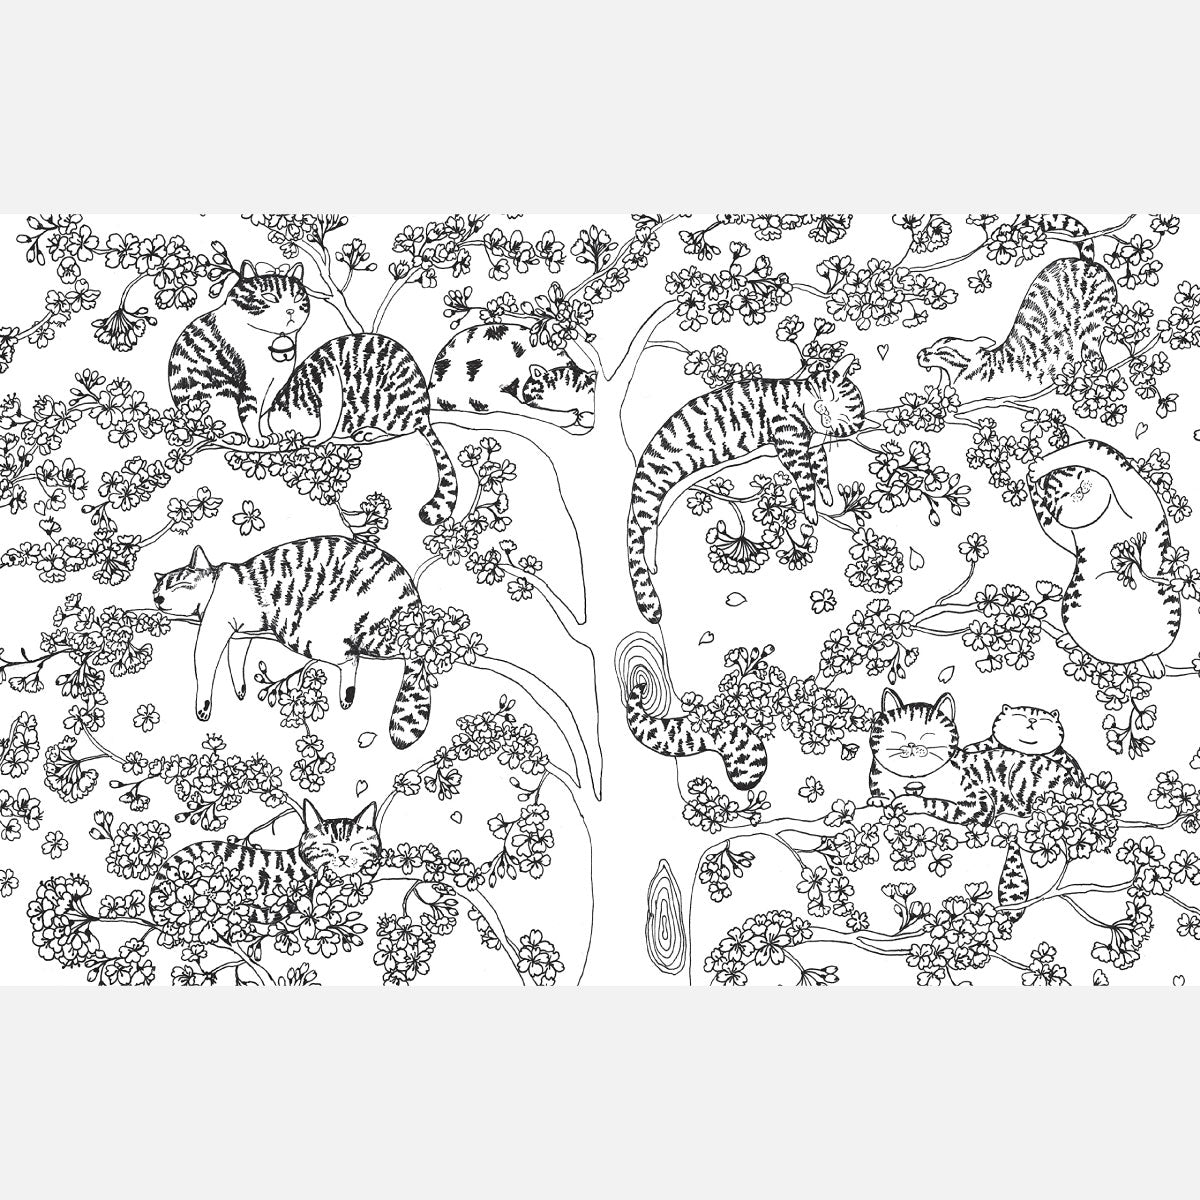 A Million Cats Coloring Book by Lulu Mayo